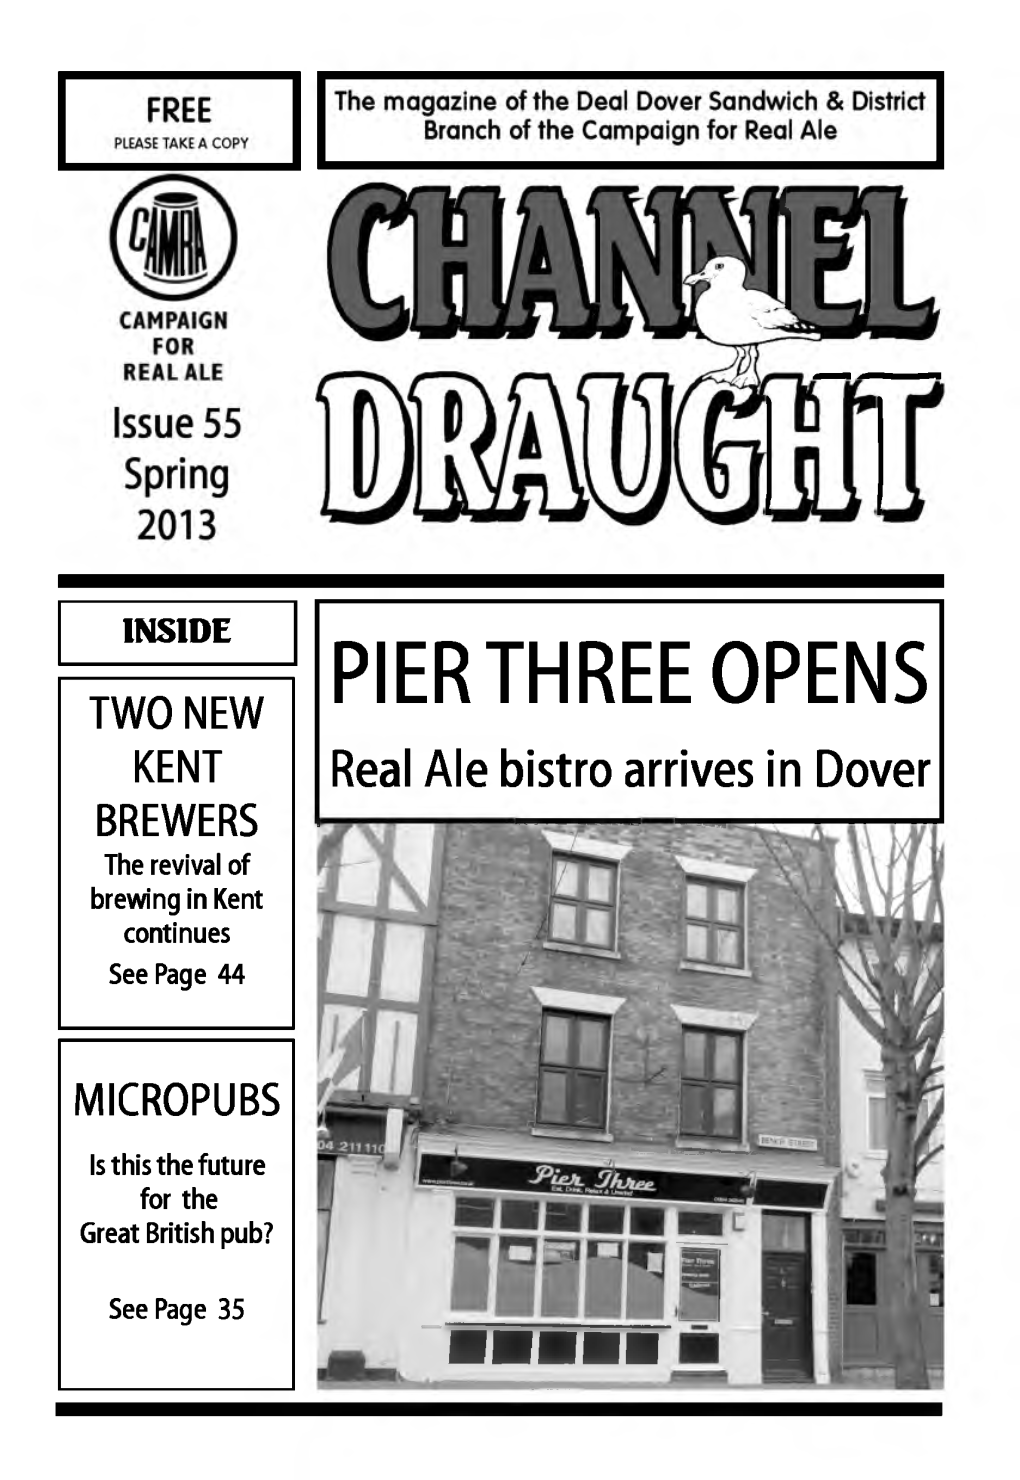 PIER THREE OPENS TWO NEW KENT Real Ale Bistro Arrives in Dover BREWERS the Revival of Brewing in Kent Continues See Page 44